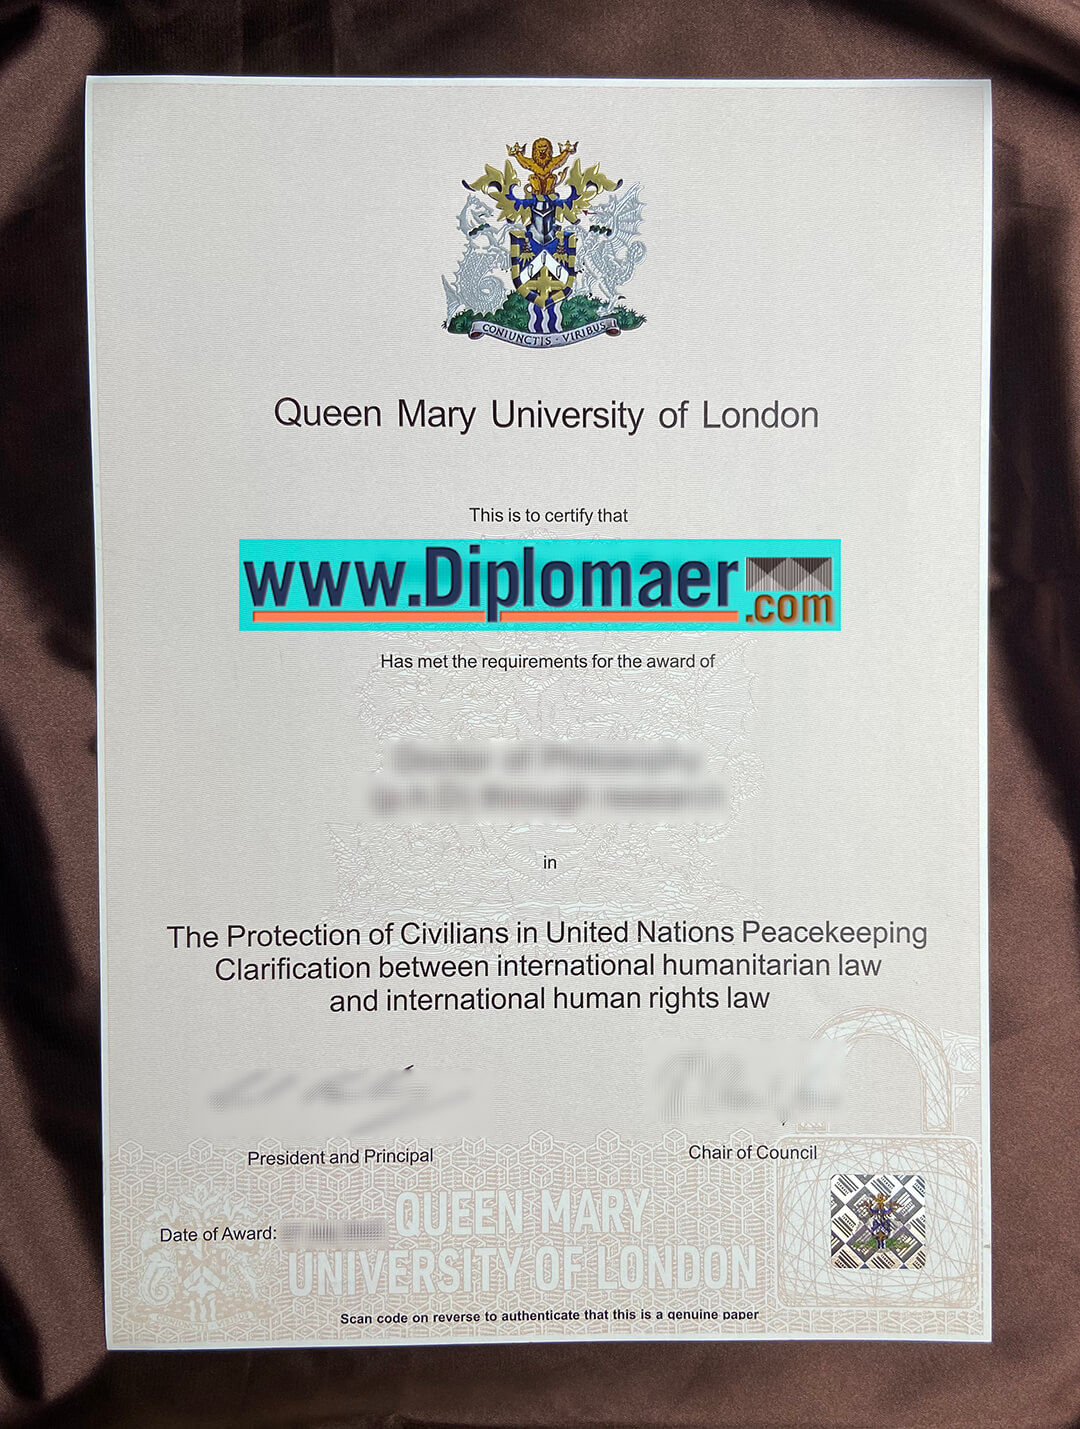 Queen Mary University of London Fake Diploma - How to Get a Queen Mary University of London Diploma Quickly?